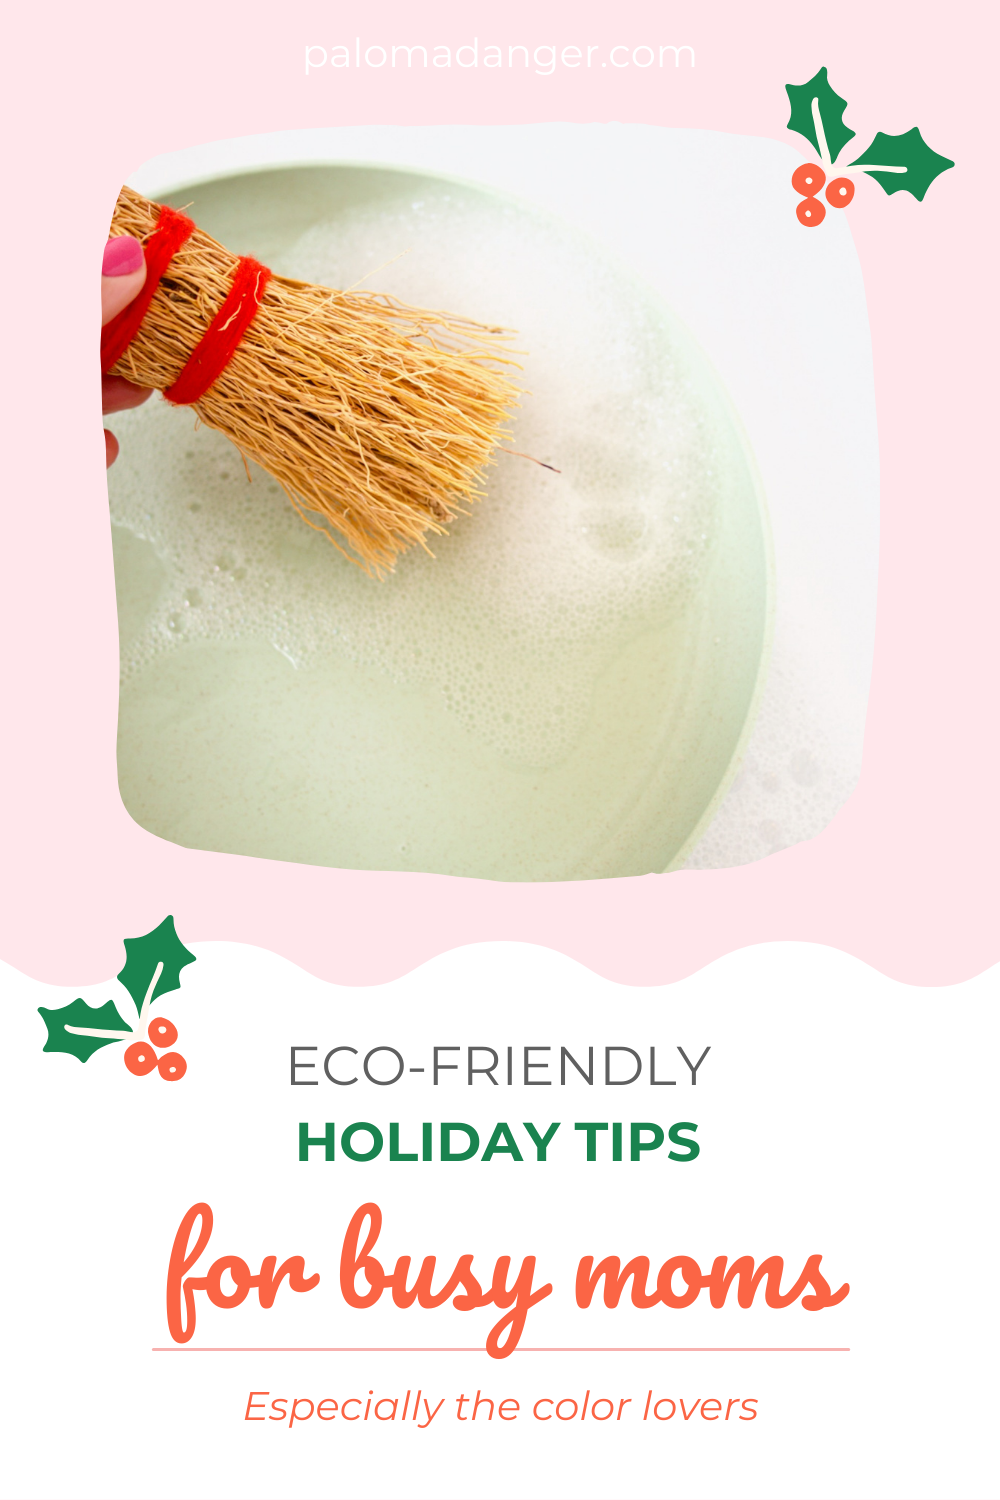 image of a natural escobeta scrubber with text below that reads ecofriendly holiday tips for busy moms, especially the color lovers